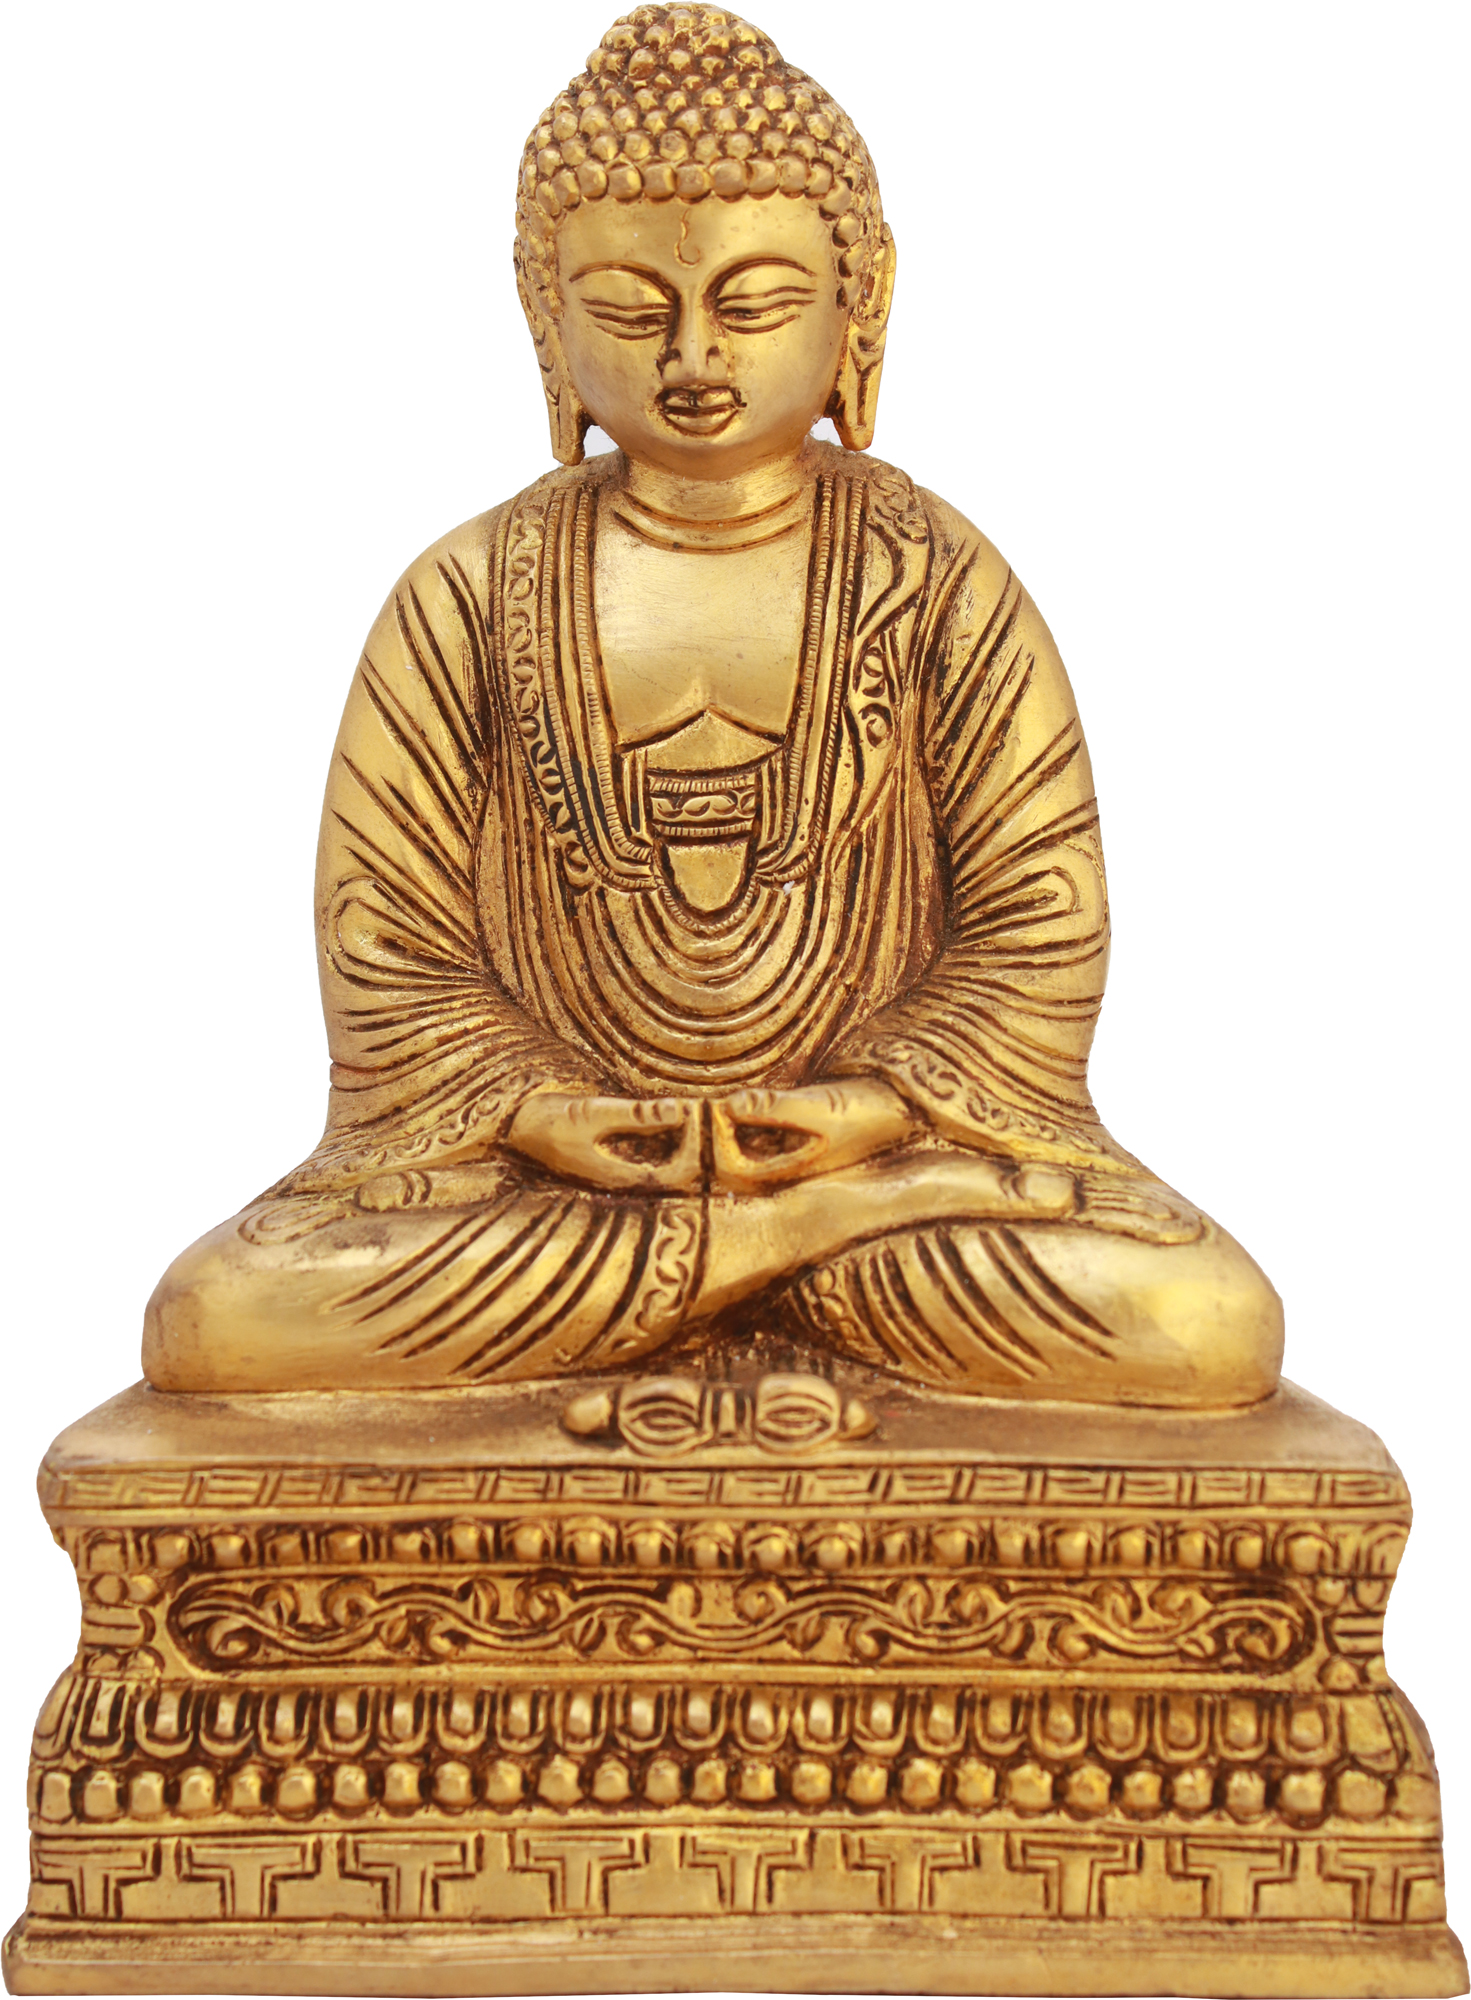 Color Red Gold Color - Brass Statue Exotic India Tibetan Buddhist Lord Buddha in Dhyana Mudra Meditation